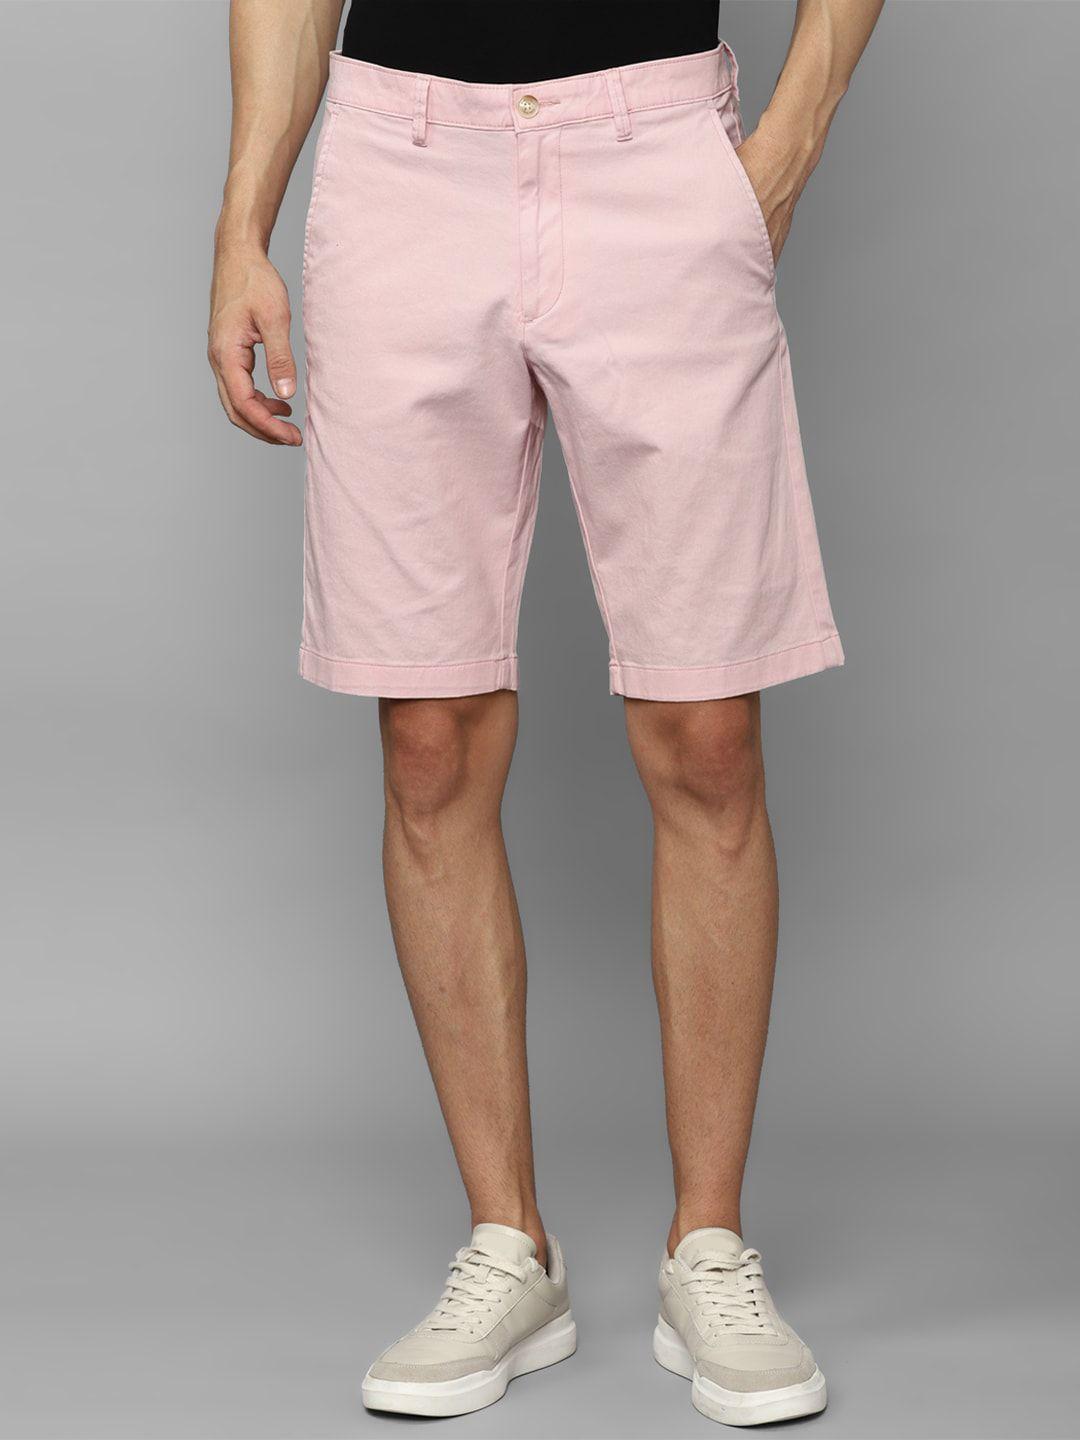 allen-solly-men-slim-fit-mid-rise-chino-shorts